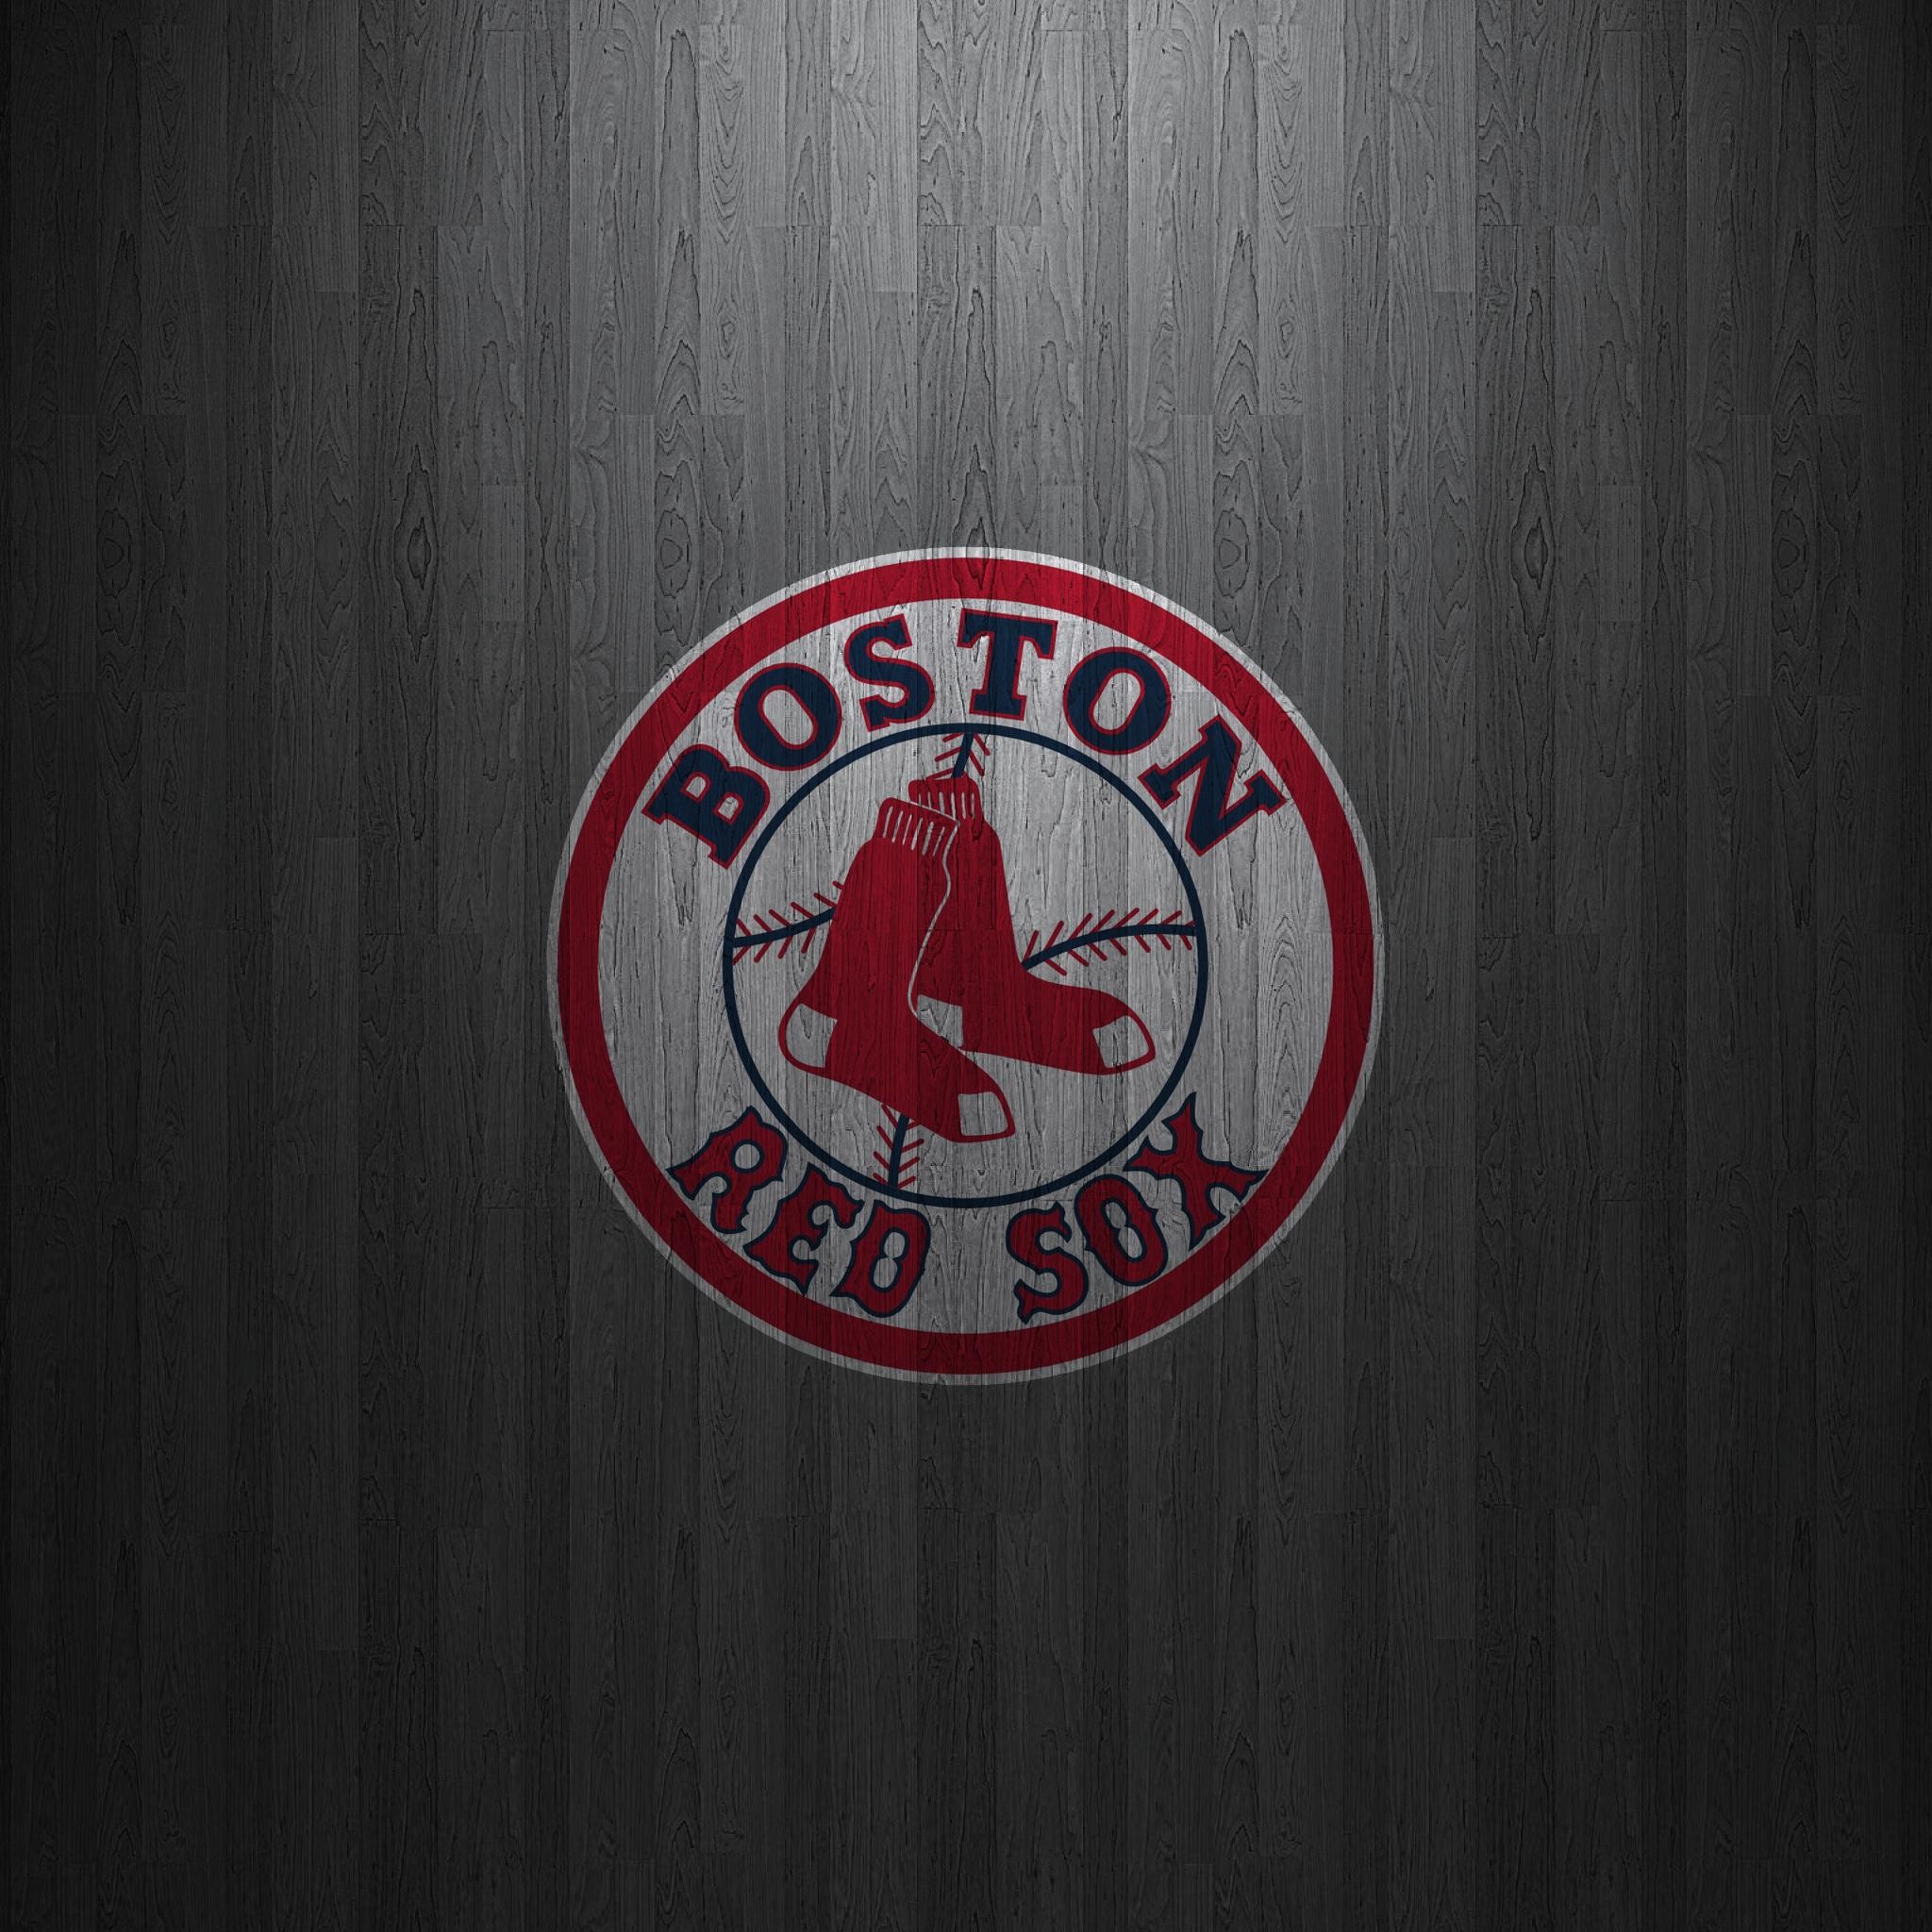 Download wallpapers Boston Red Sox emblem golden emblem MLB red metal  background american baseball team Major League Baseball baseball Boston  Red Sox for desktop with resolution 2880x1800 High Quality HD pictures  wallpapers